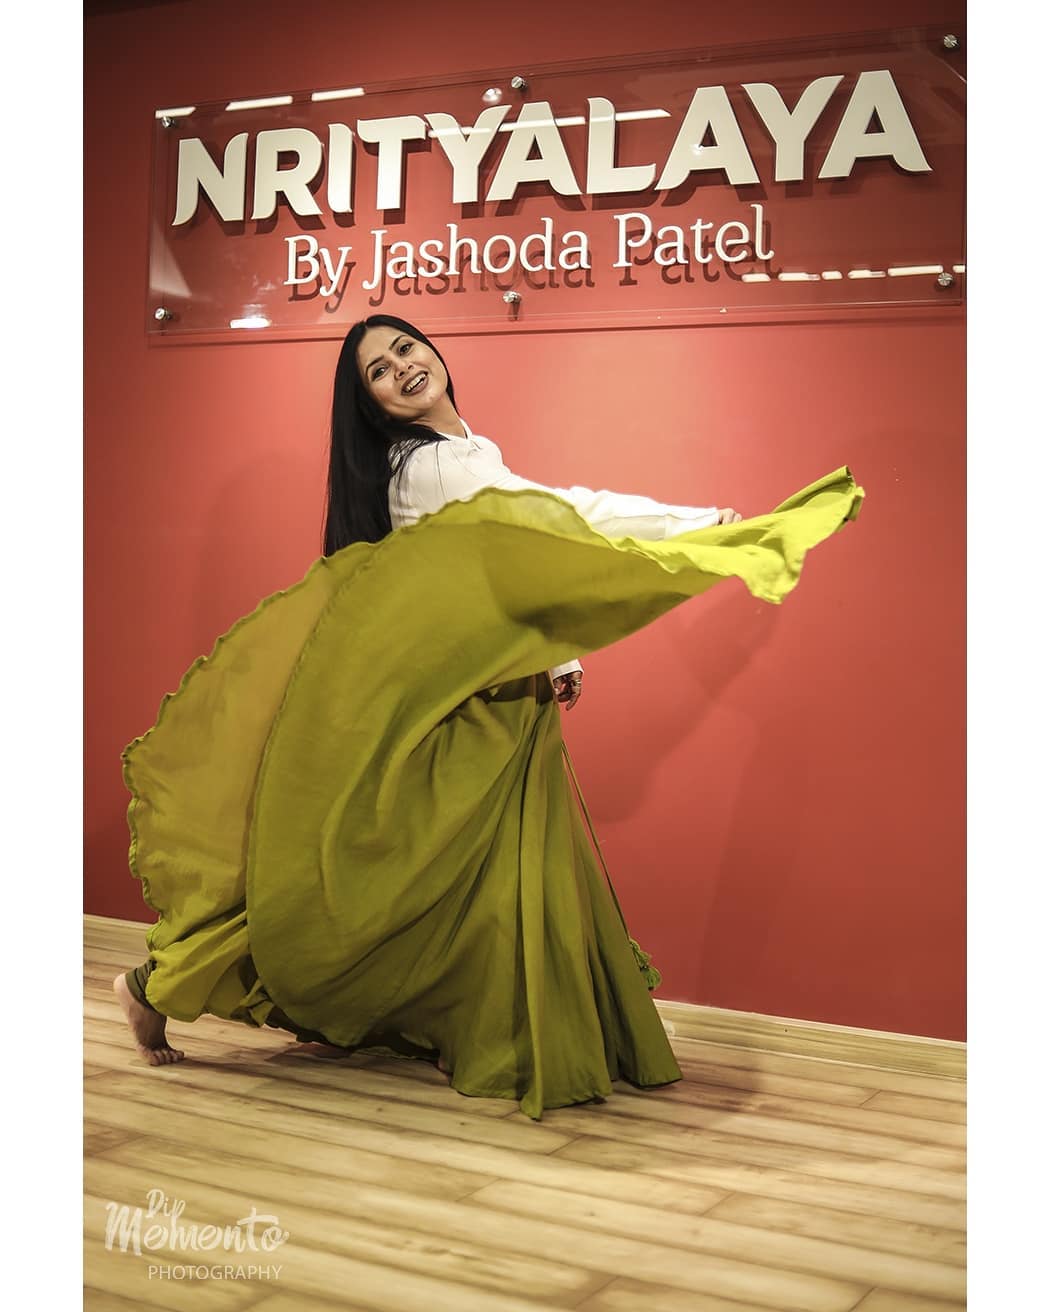 You are a work of art. Not everyone will understand you, but the ones that do, will never forget you....
.
.
Dance Shoot for  @nrityalayabyjashodapatel
@jashodapatel_kathak
📸@dip_memento_photography
.
. 
#kathakdancers #indiandancecrew #bollywooddance #dancersofindia
 #kathak #kathakdance #classicaldance #ahmedabad #indianclassicaldance #dancephotography #chakkars #happydancing #classicaldance #indiandancer #dancersofinstagram #indianclassicaldance  #kathakdance #kathakdancer #indianclassicaldancers #9924227745 #dipmementophotography  #worldofdance #dance #indiandanceform #loveforkathak #dancers #dancersindia #indiaportraits